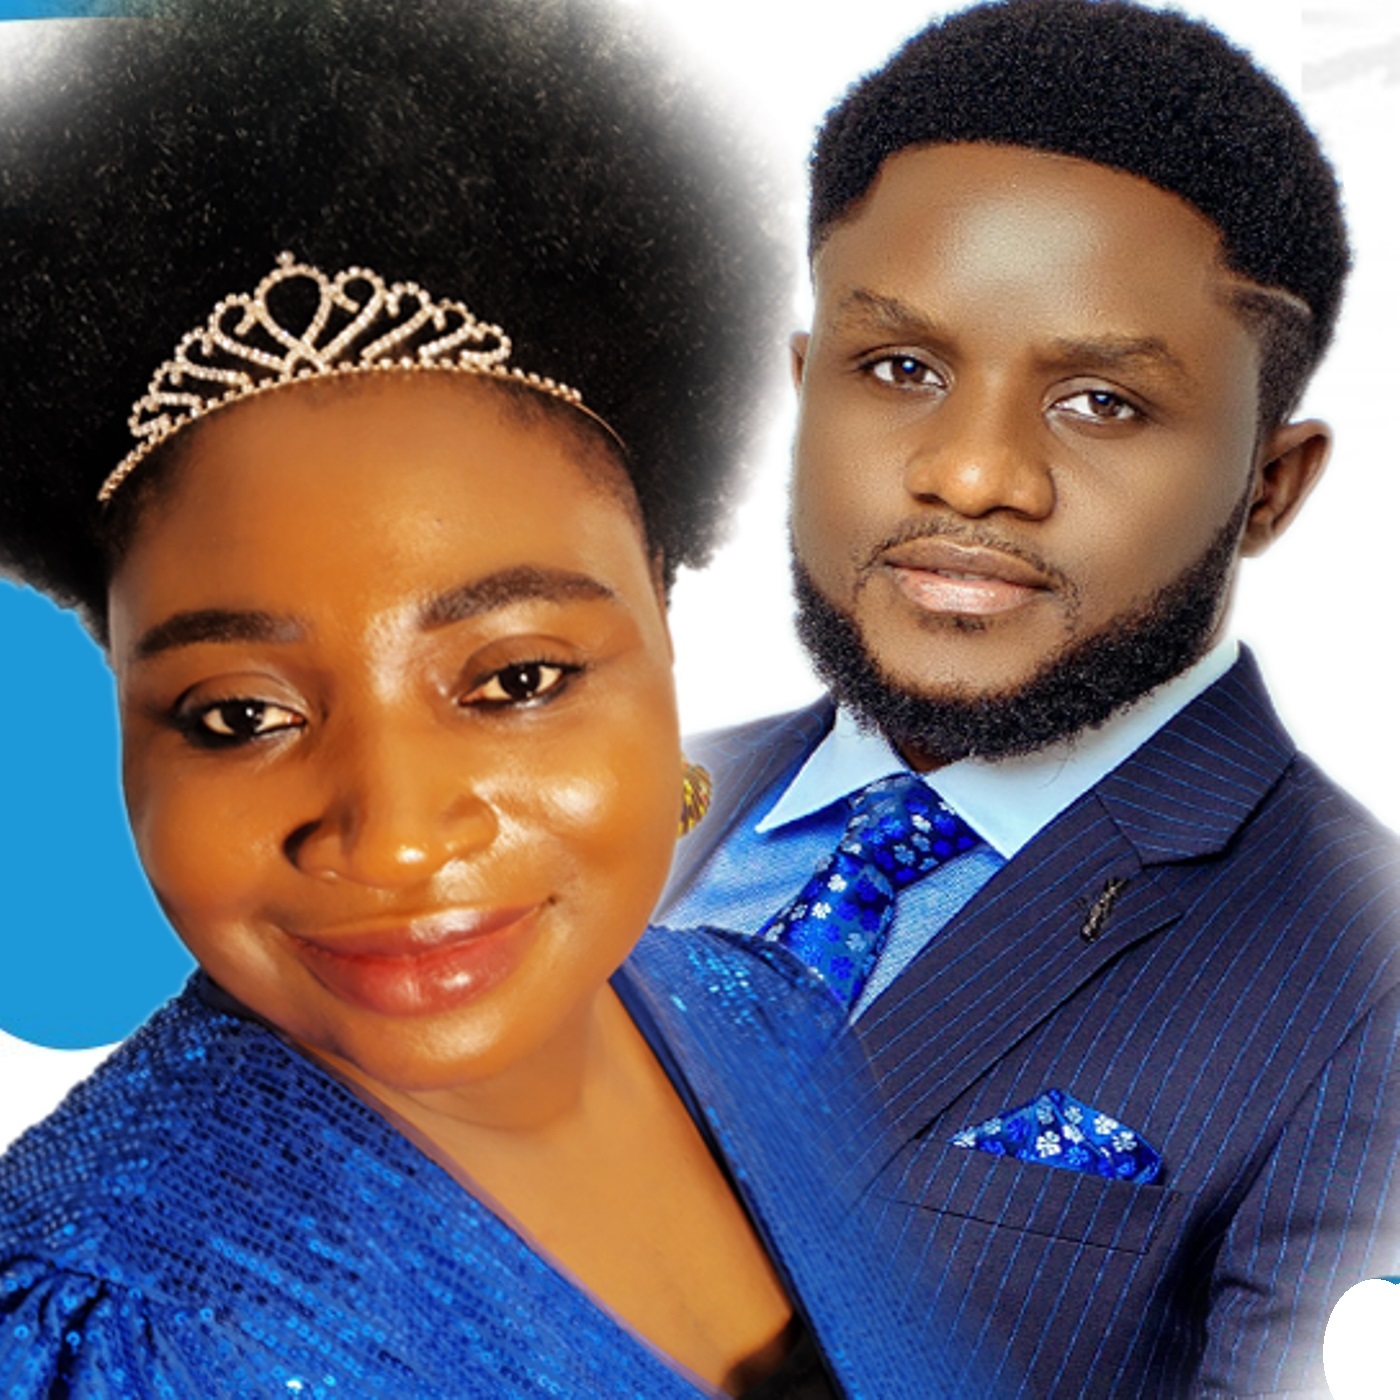 Musicians, QueenLet and Minister Jimmy D Psalmist